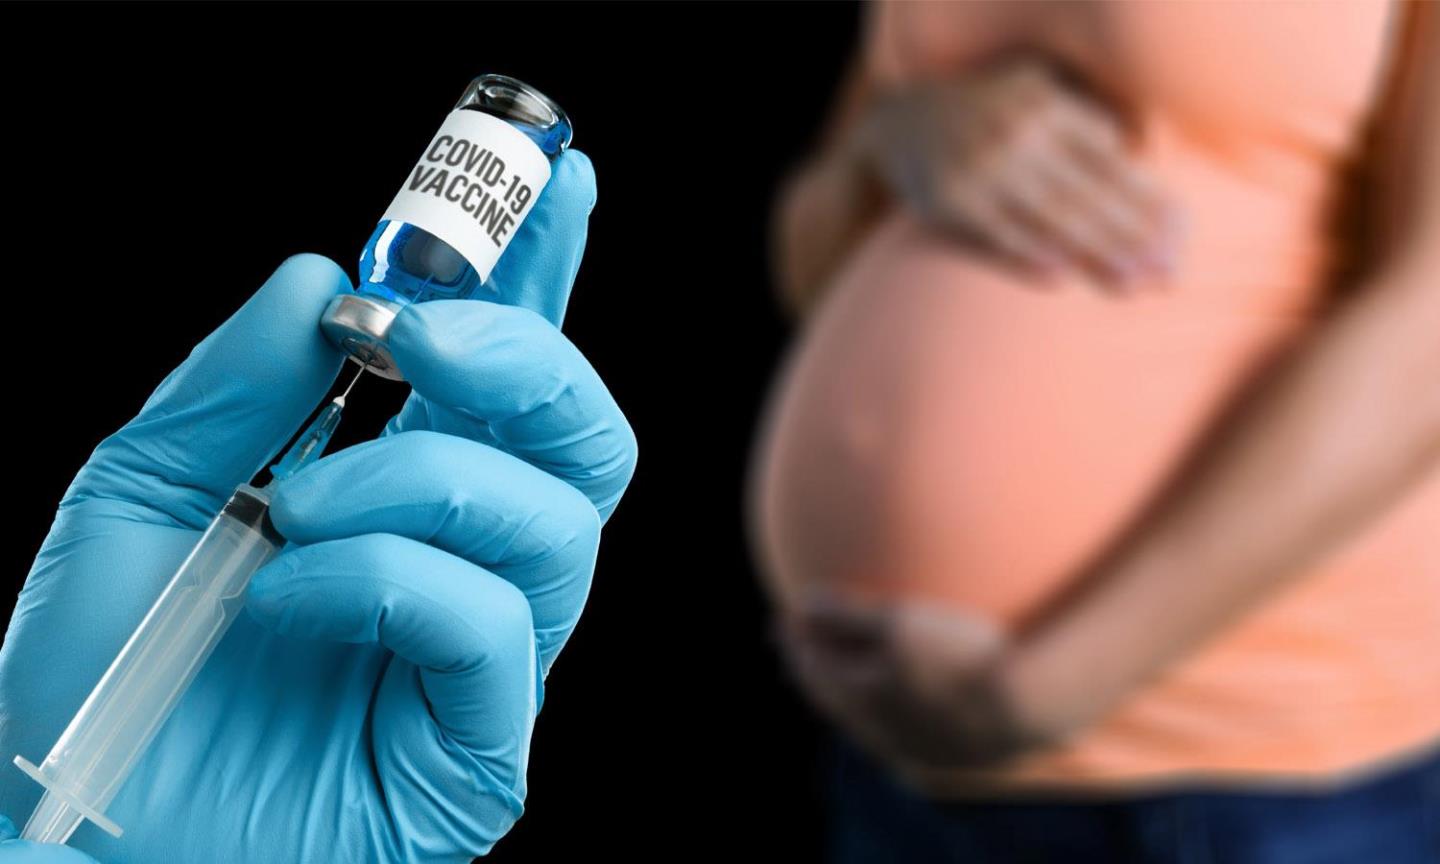 It is "biologically implausible" that the vaccine could affect someone's fertility.